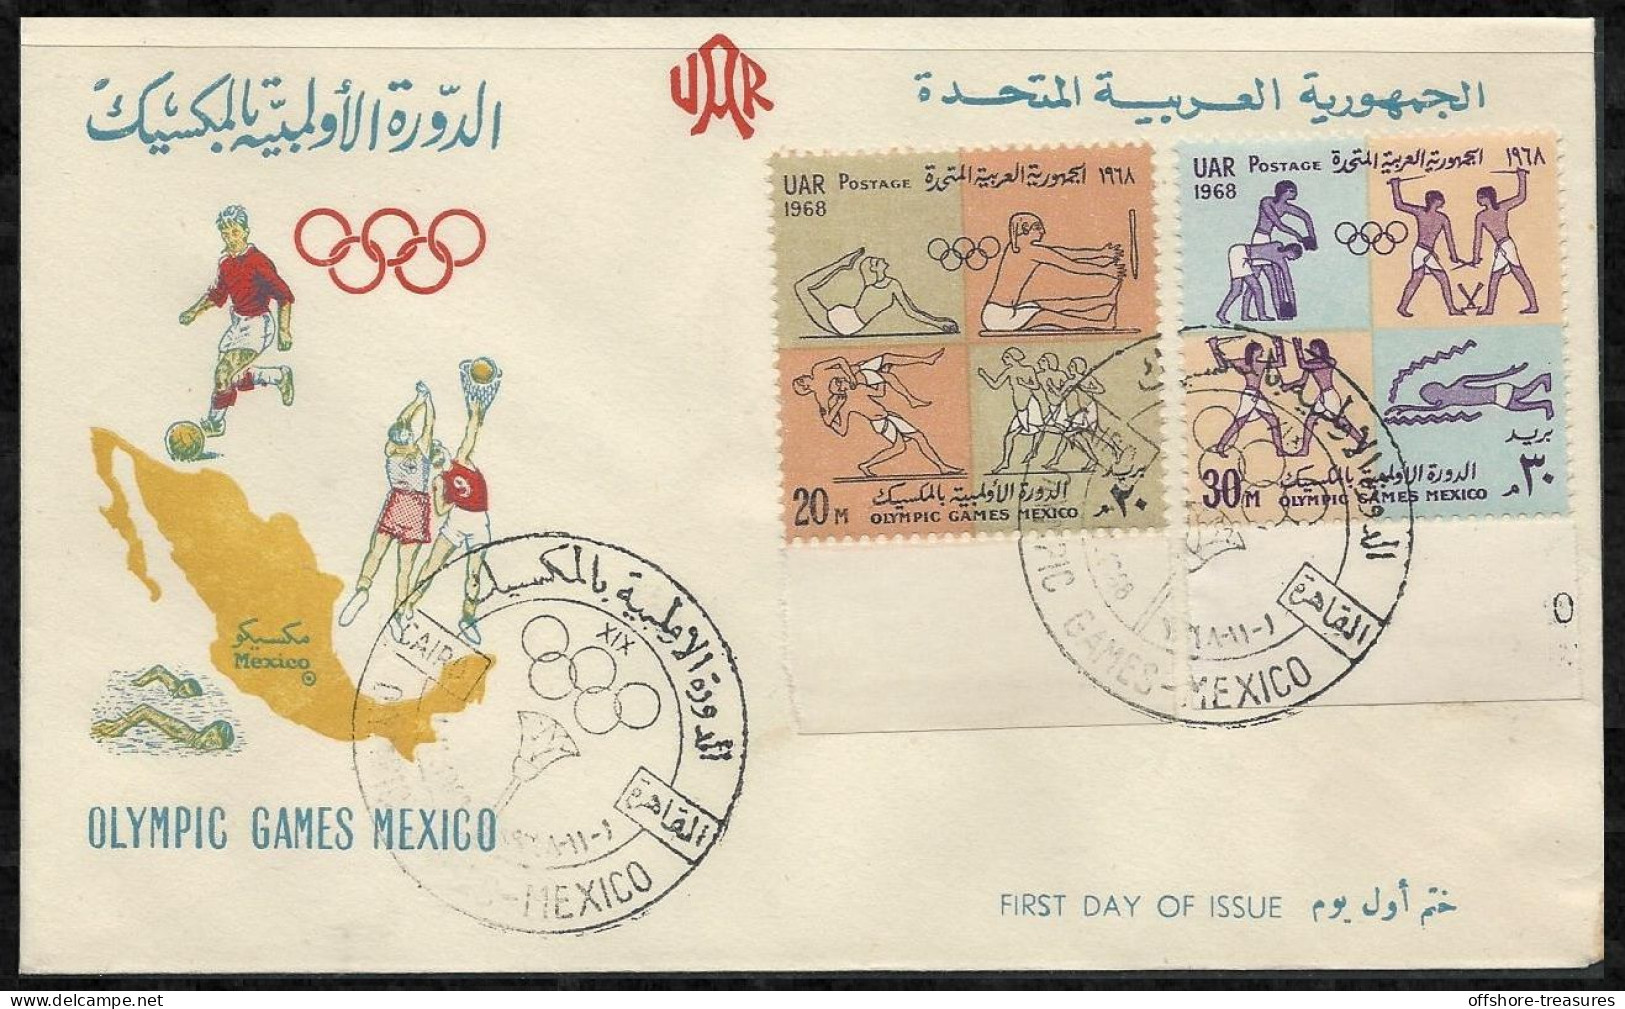 Egypt UAR POSTAGE 1968 Olympic Games Mexico FDC / First Day Cover - Neufs